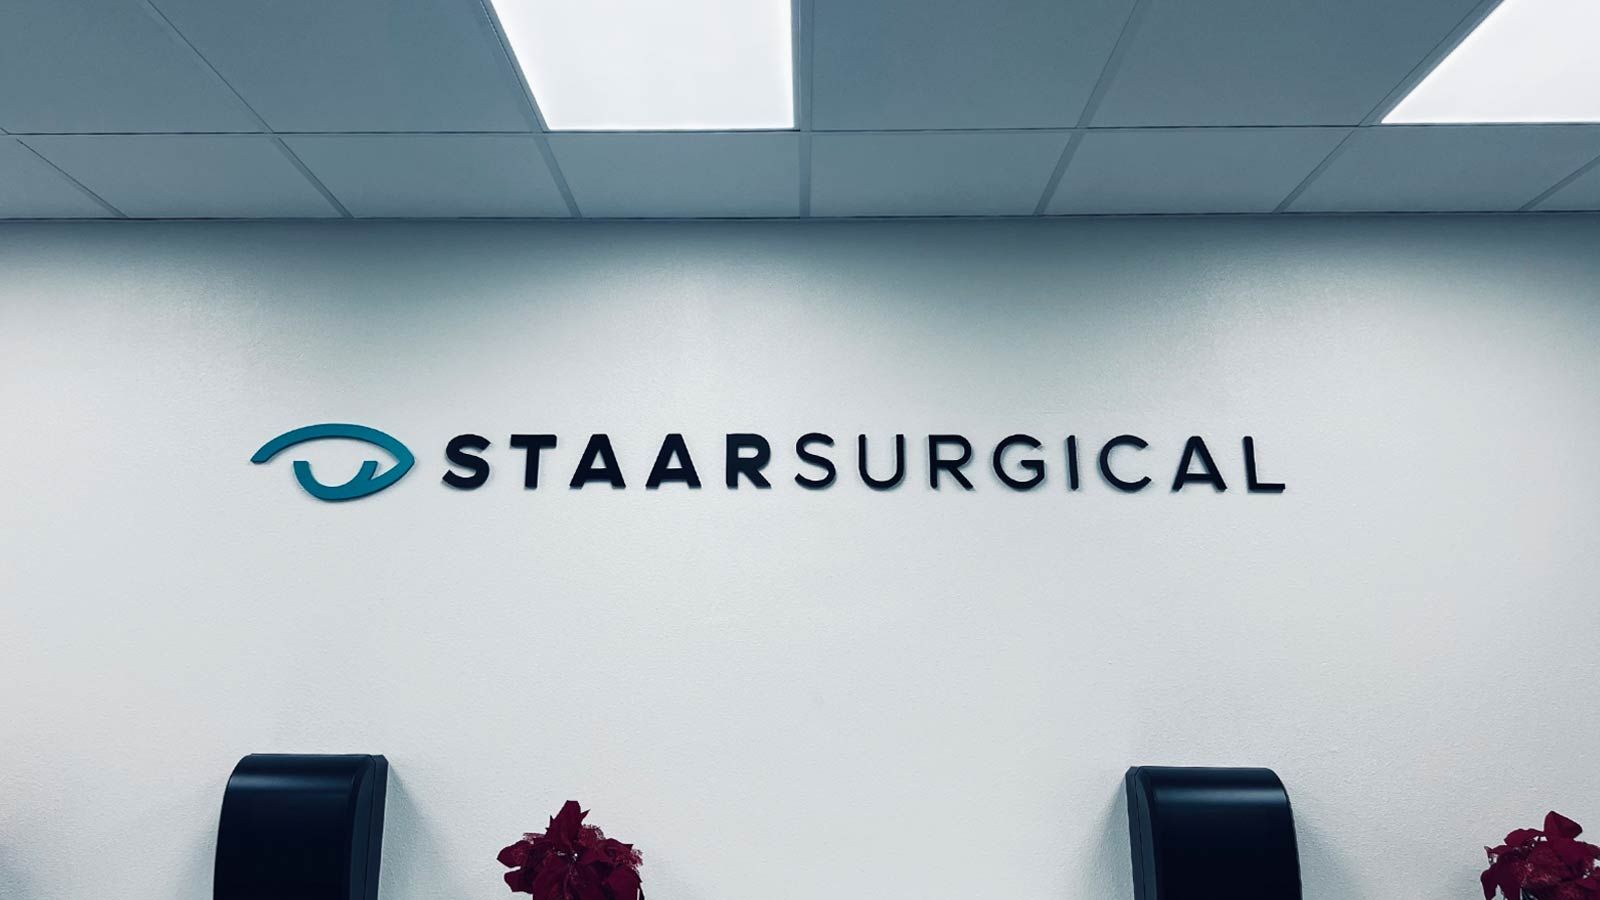 STAAR Surgical interior sign attached to the wall